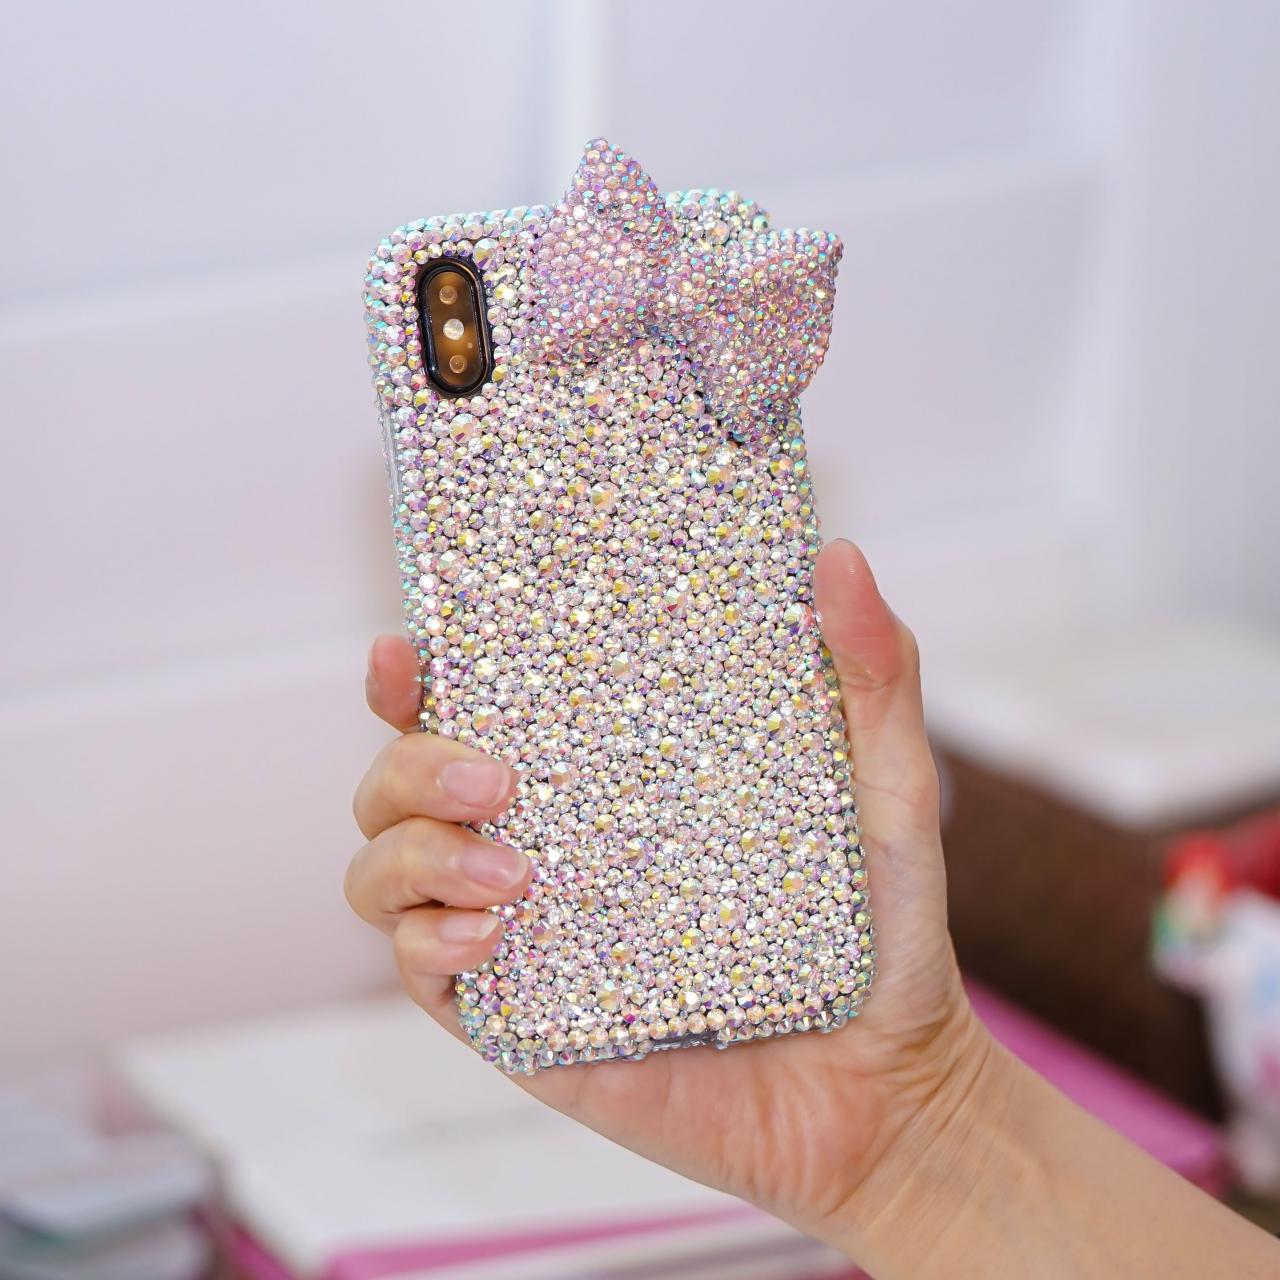 Bling Baby Pink Bow Genuine AB Crystals Diamond Sparkle Easy Grip Case Cover For iPhone X XS Max XR 7 8 Plus Samsung Galaxy S9 S8 Plus Note